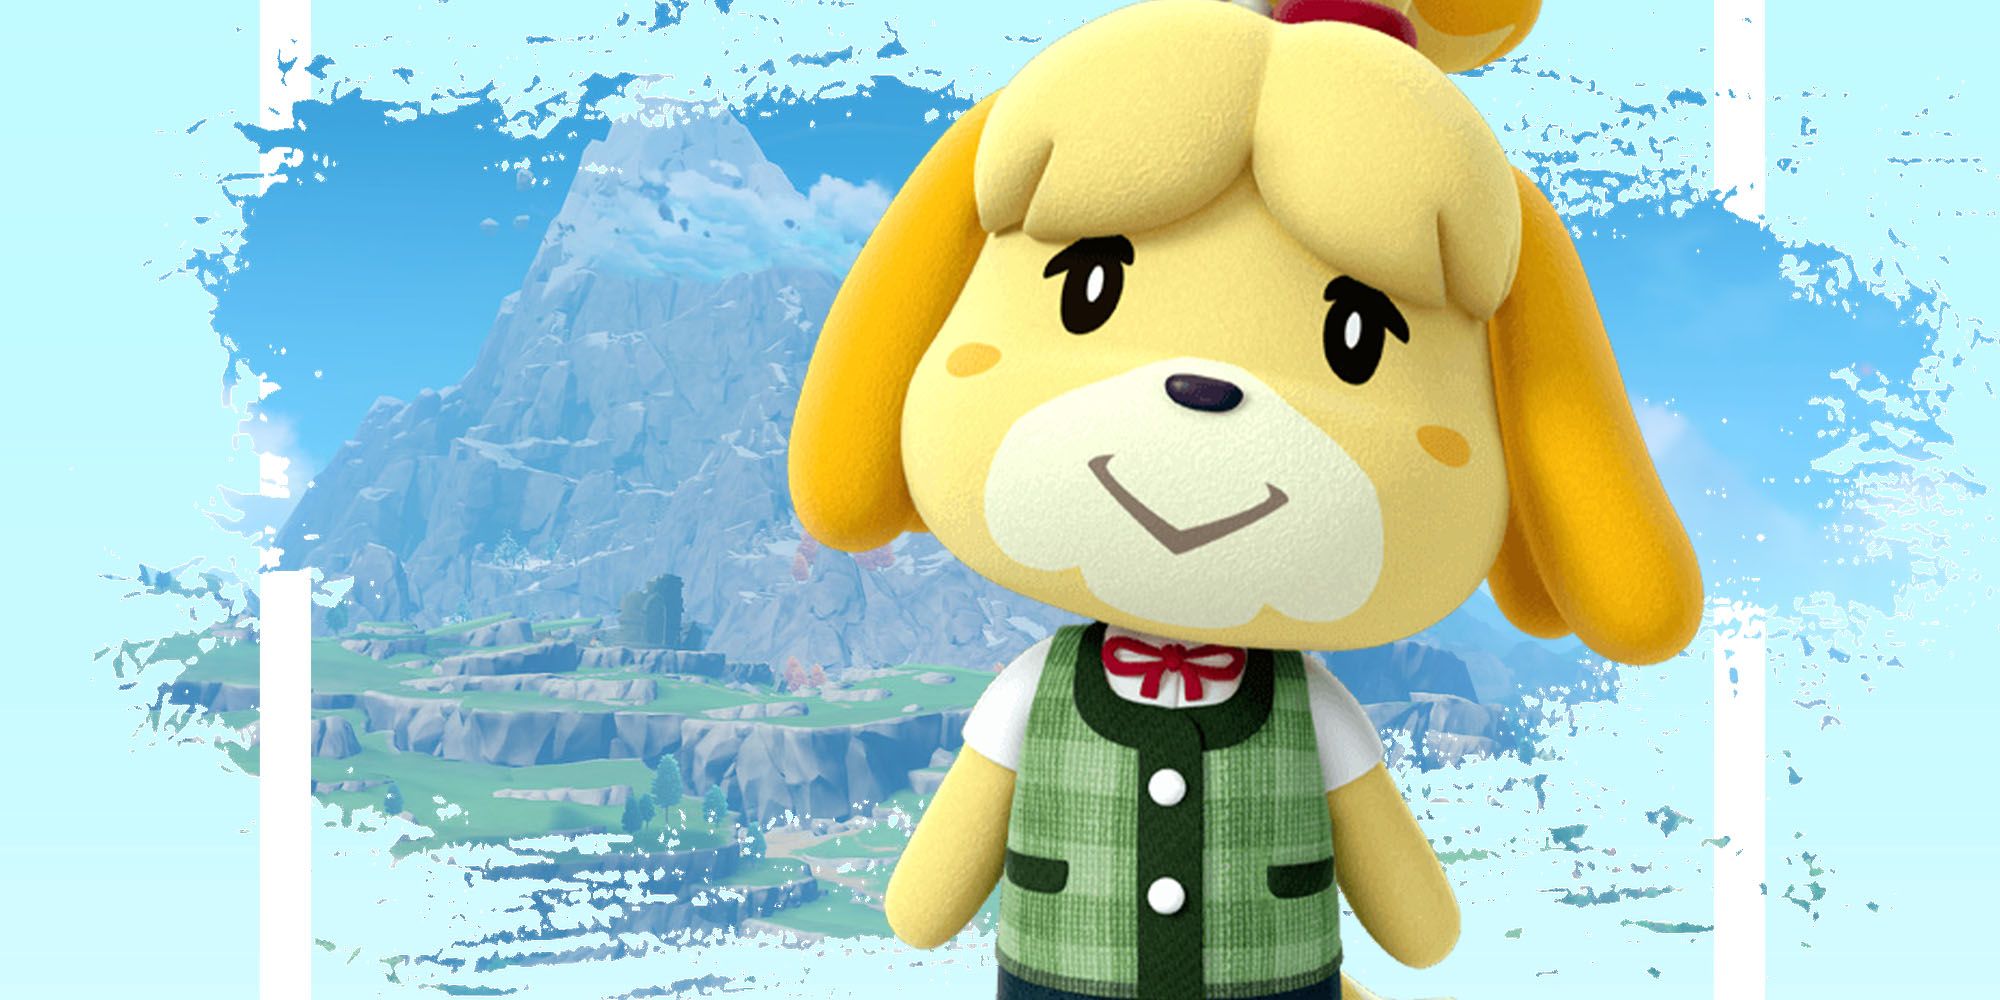 Genshin Impact mountain with Isabelle from Animal Crossing over the top